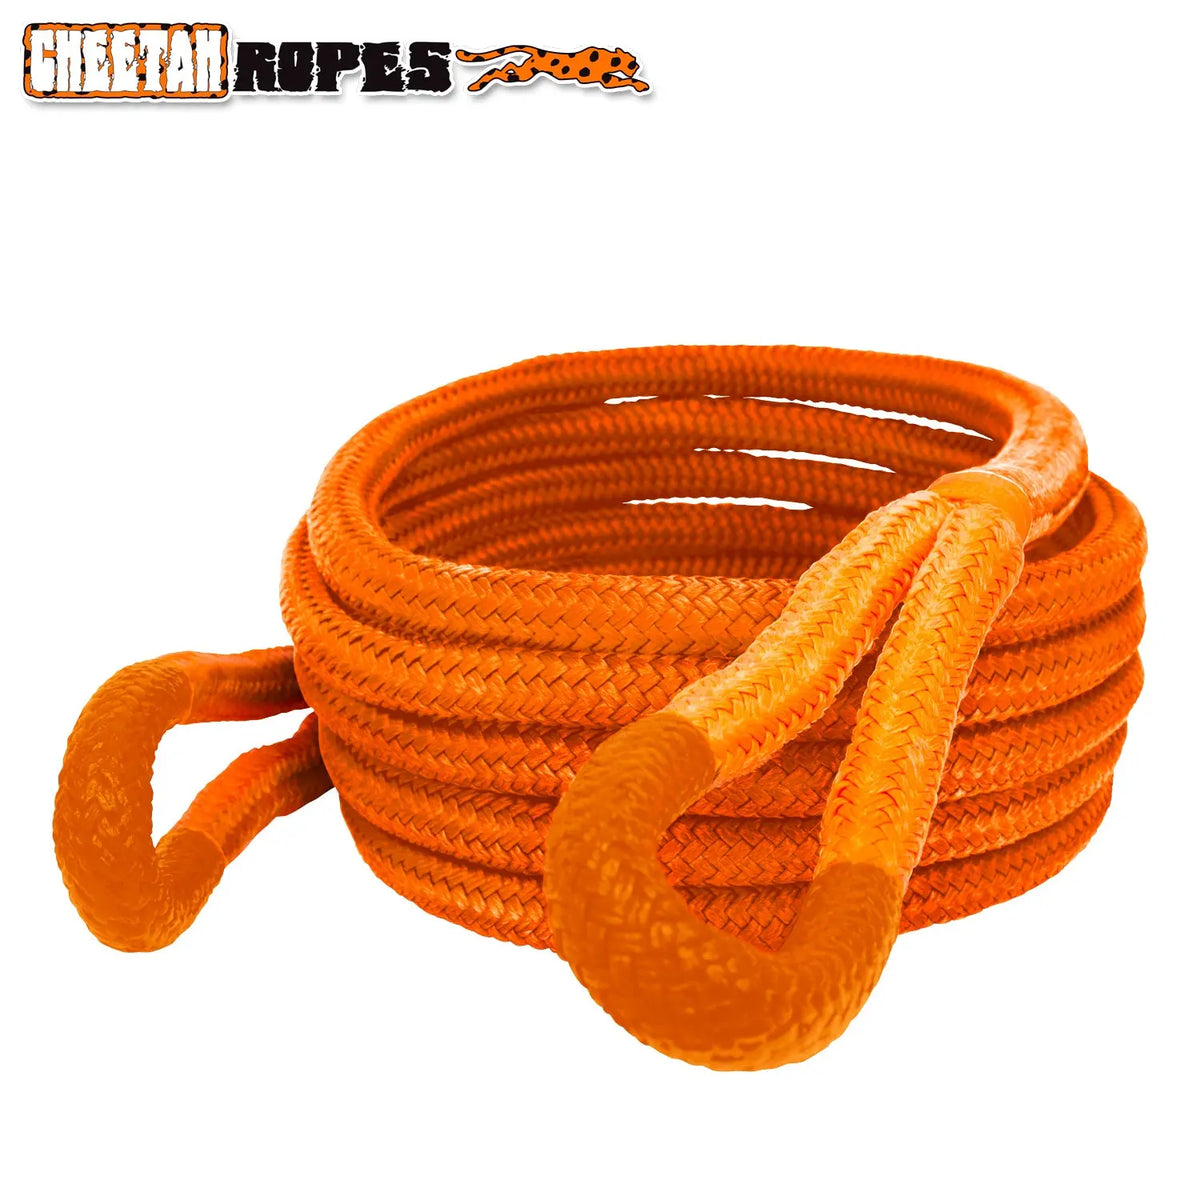 4 5mtr 8 Plait Kinetic Energy Recovery Rope K E R R